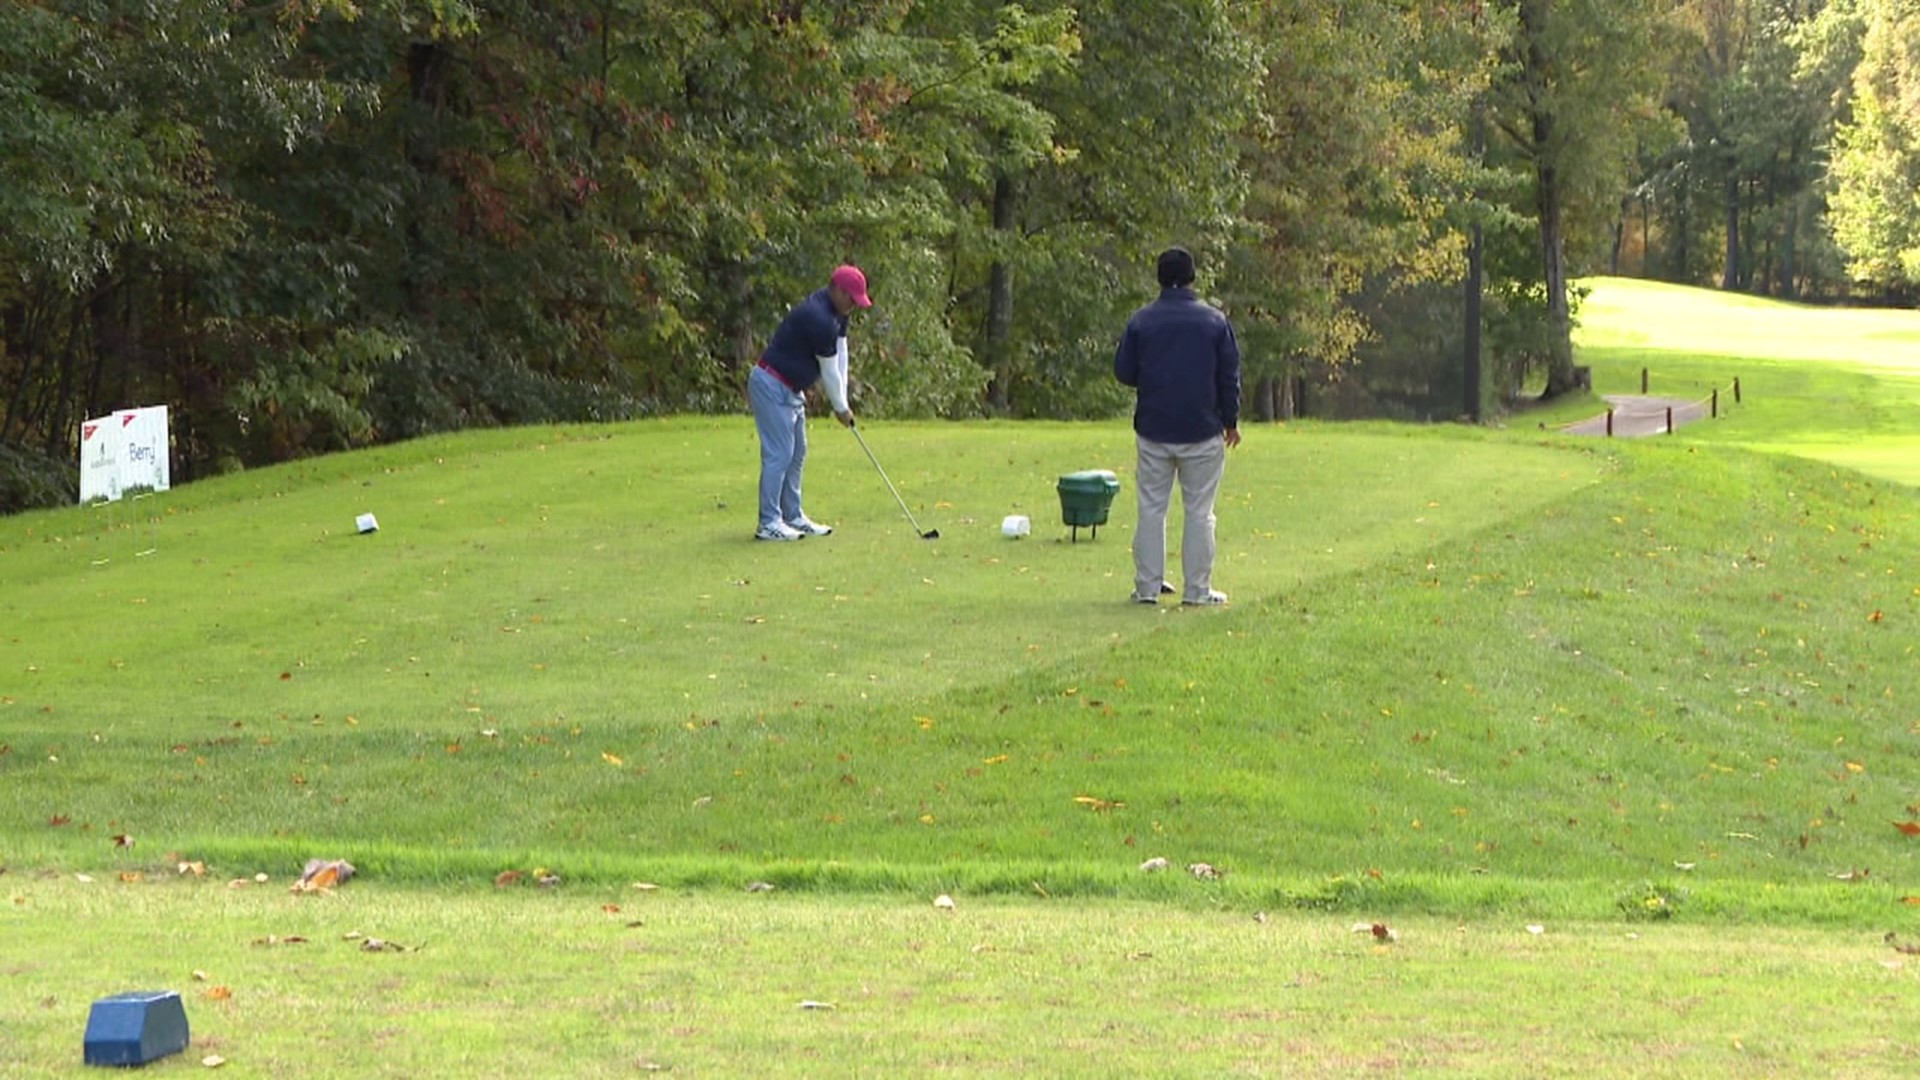 A golf tournament to support Mental Health Awareness took place in Luzerne County on Sunday.